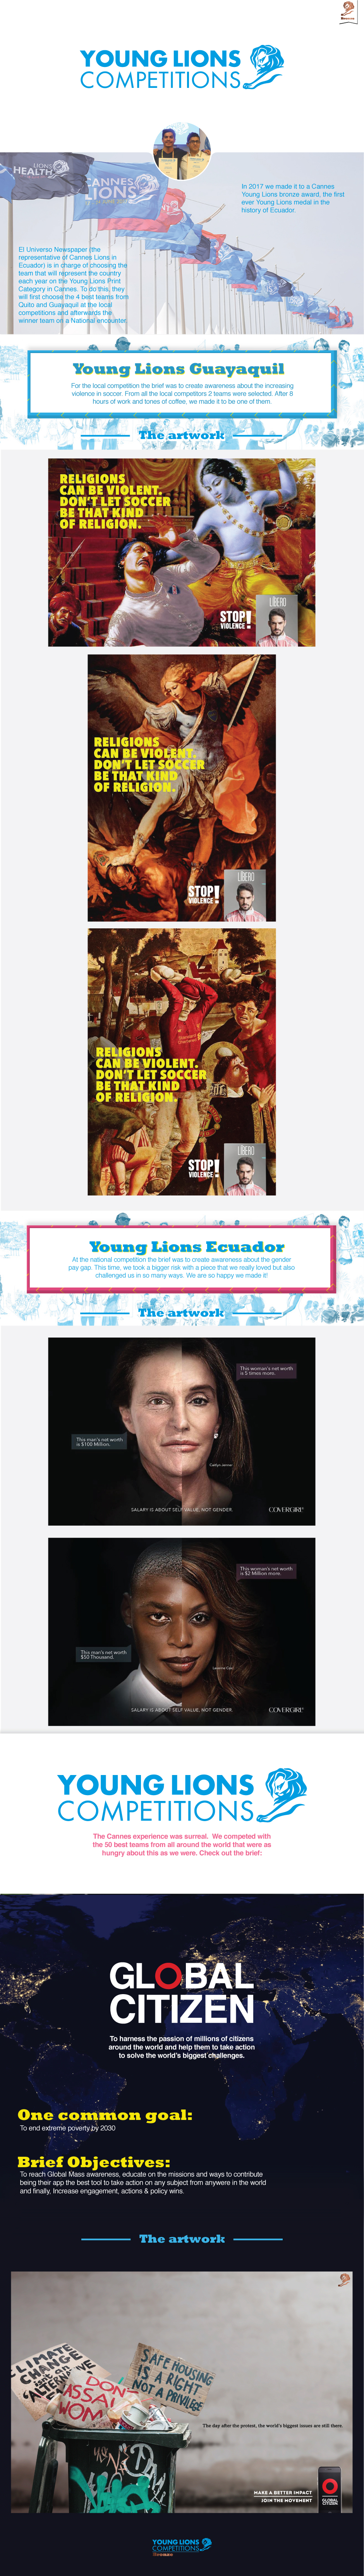 Cannes Young Lions Board 2017